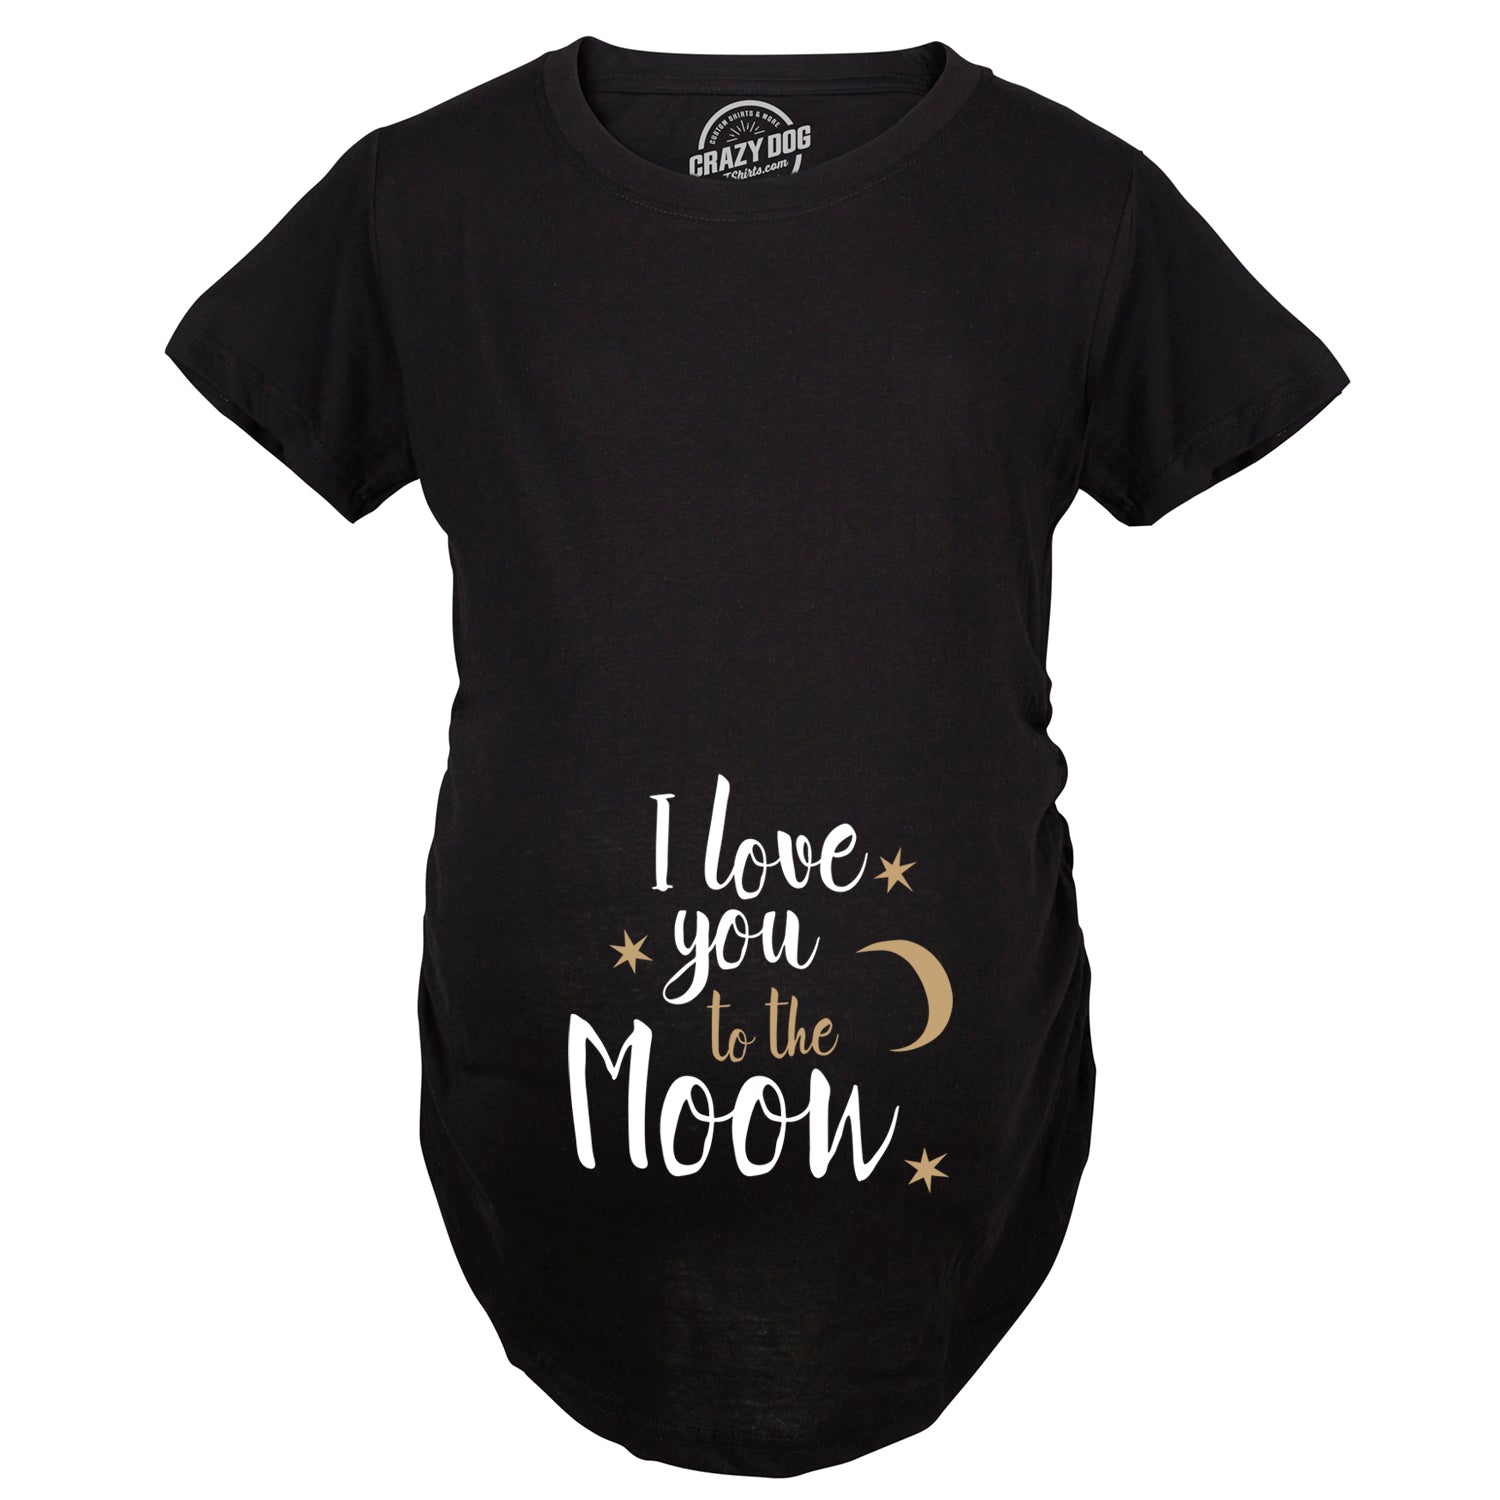 Funny Black I Love You To The Moon Maternity T Shirt Nerdy space Tee